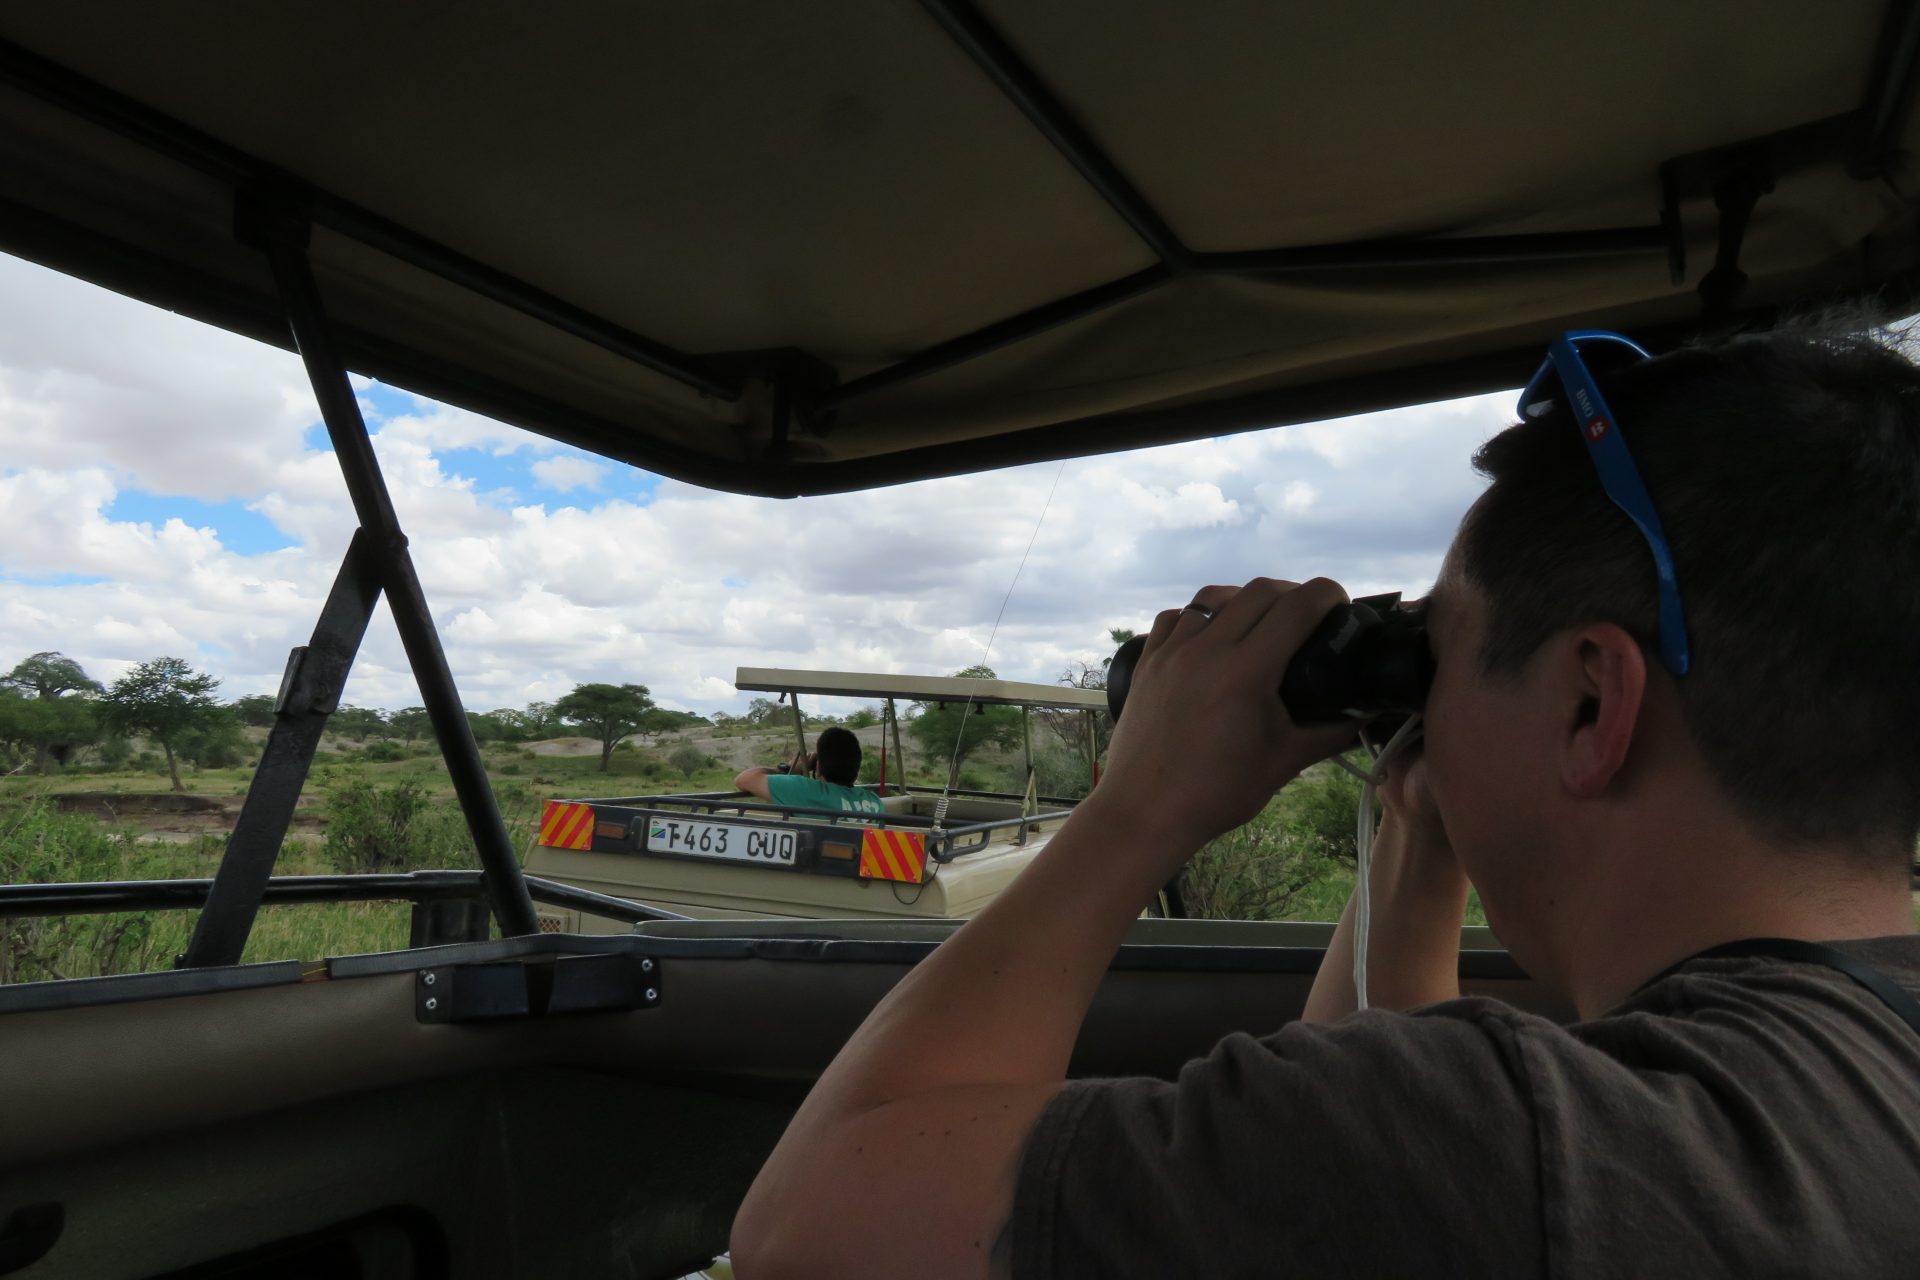 If you are planning a safari in Tanzania, a quick Google search will surely leave you feeling overwhelmed. Researching and deciding on companies was very time-consuming so I'm sharing my top tips on how to book a safari to save you some time!